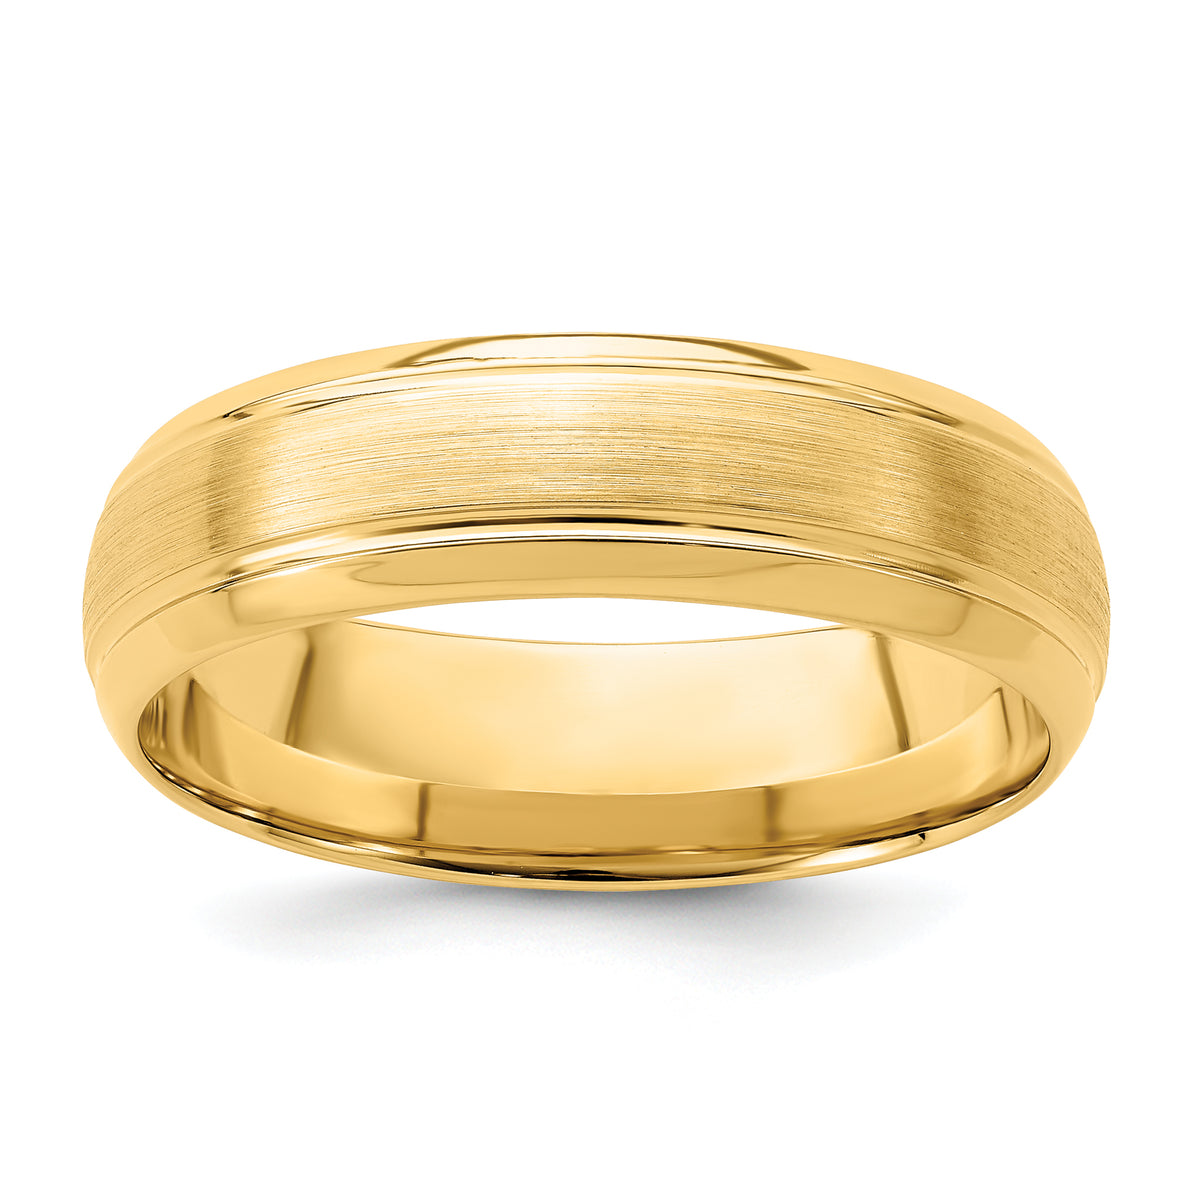 14k Yellow Gold 6mm Standard Weight Comfort Fit Brushed Satin Line Edge Wedding Band Size 13.5